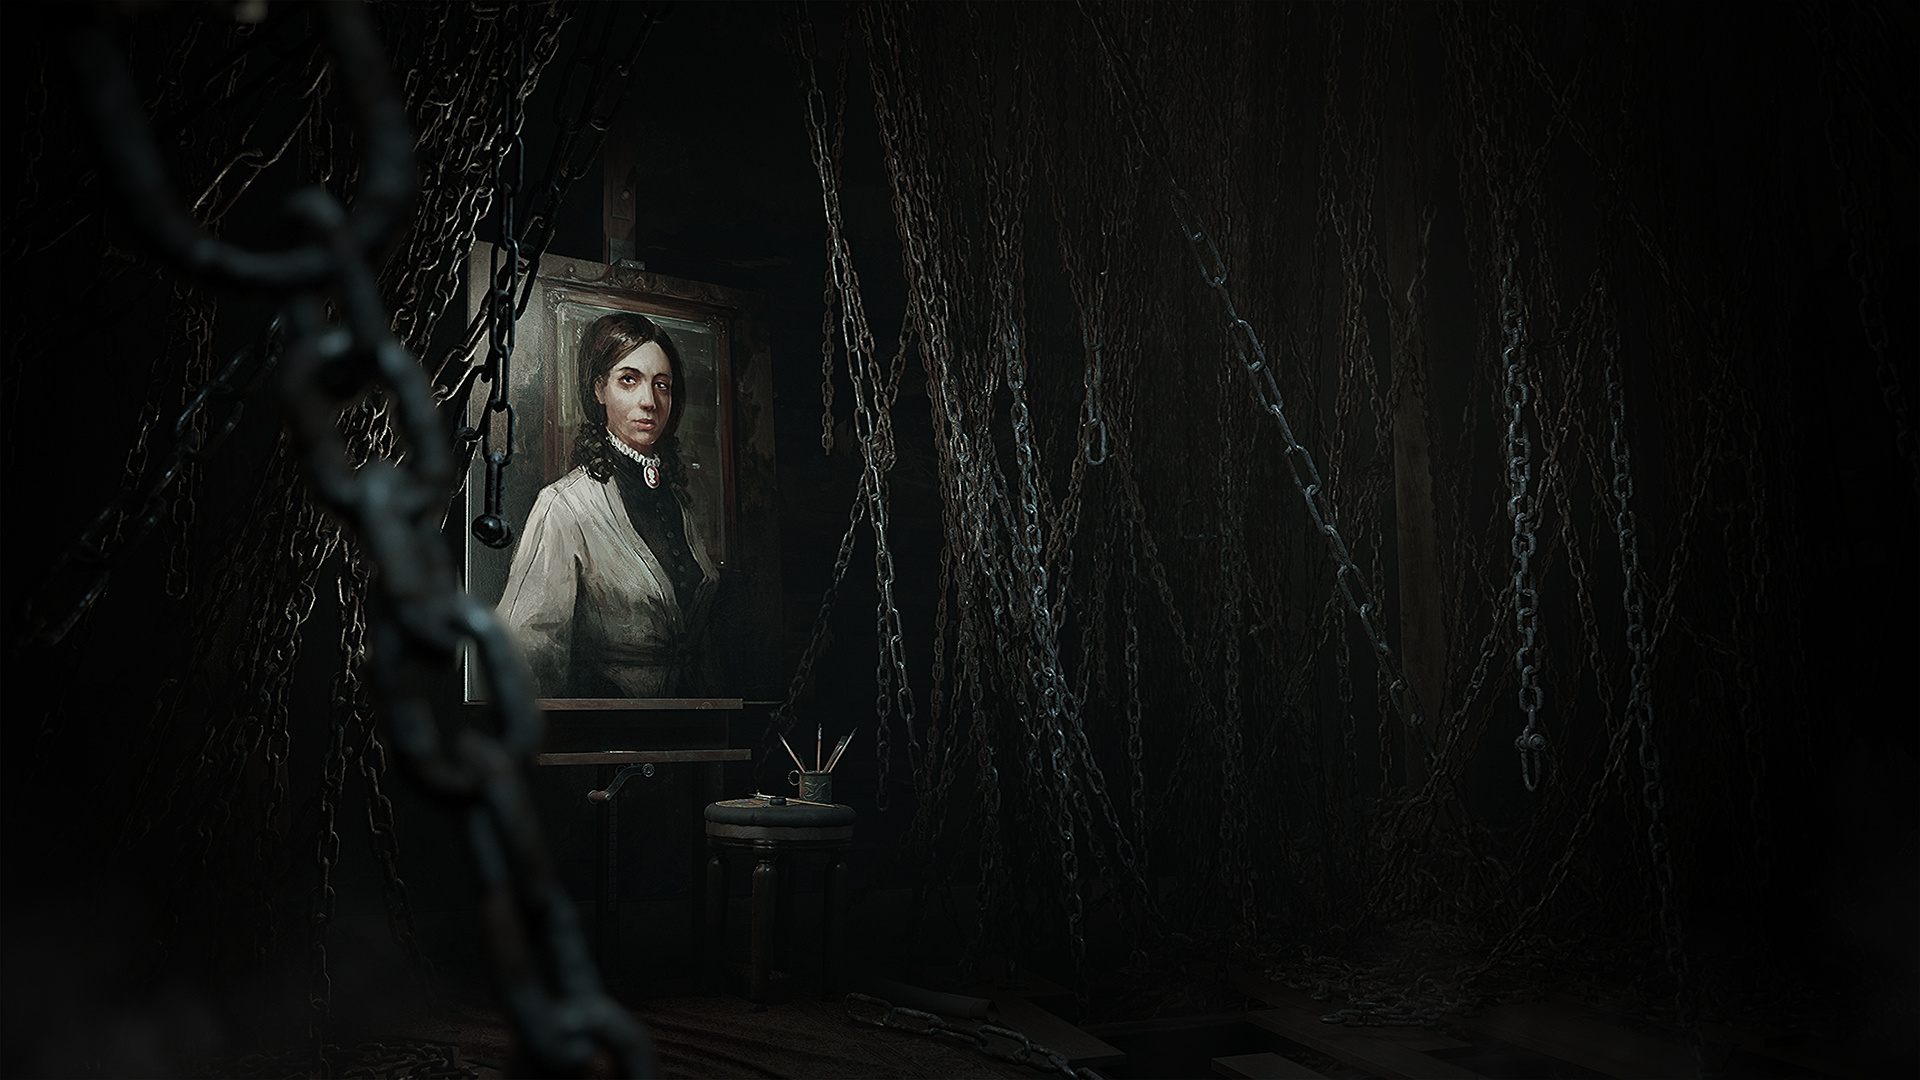 Layers of Fear trailer shows 12 minutes of gameplay footage from the upcoming horror chronicle